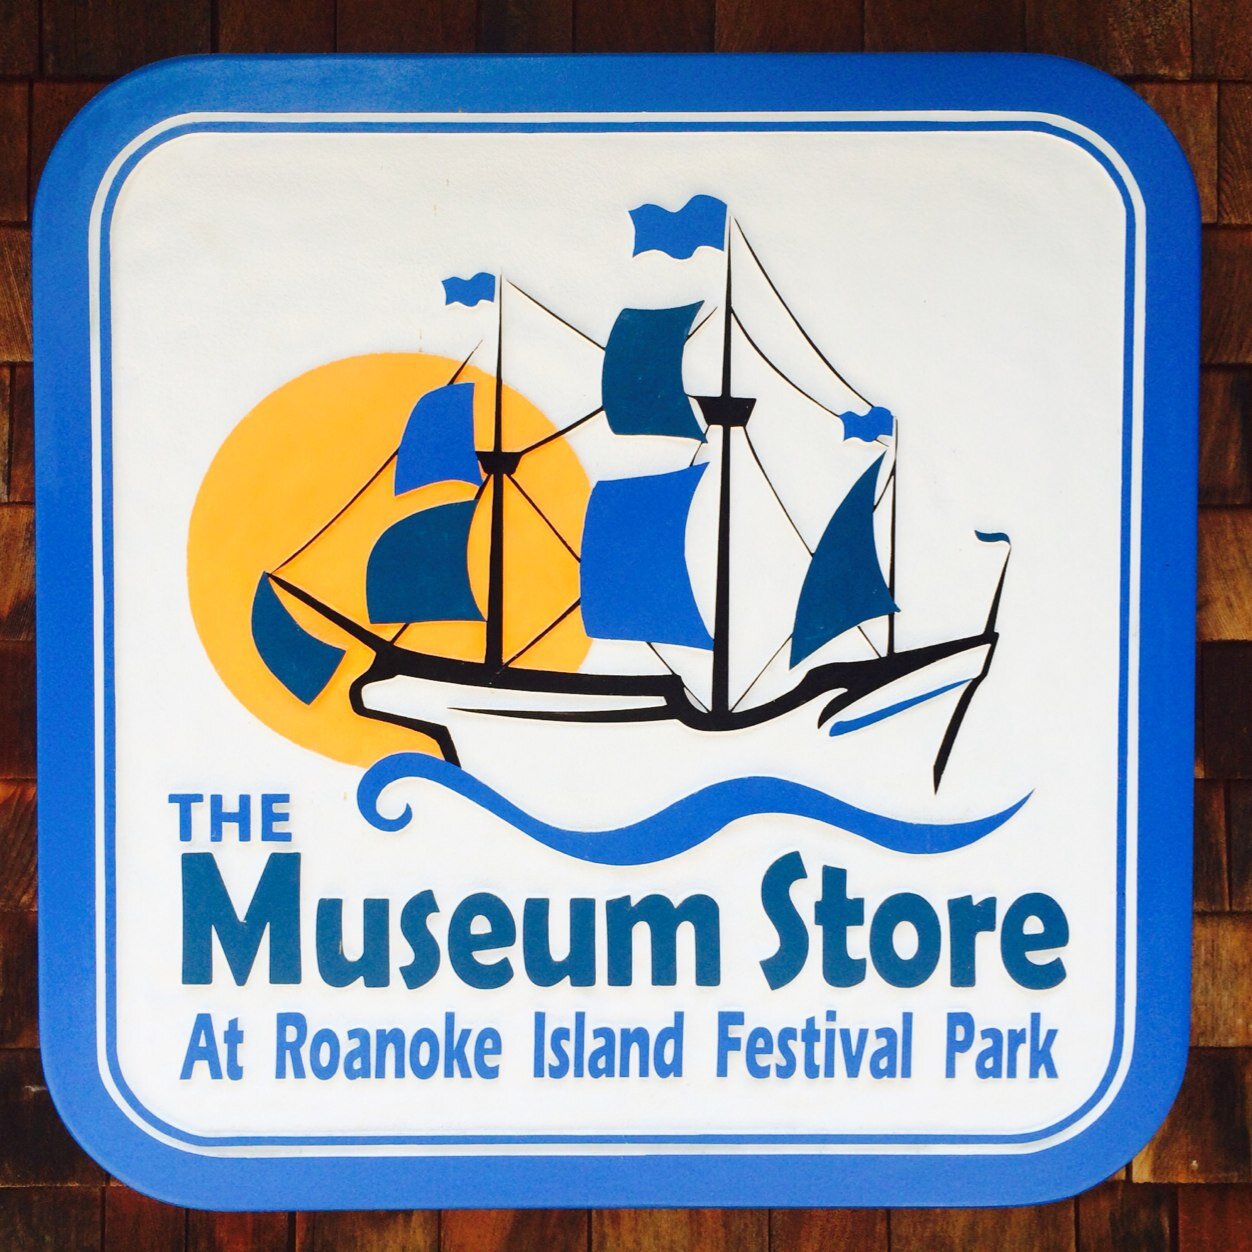 Located on Roanoke Island Festival Park, The Museum Store, Represents over 400 years of Outer Banks history with American Indian handcrafts and other fun gifts!